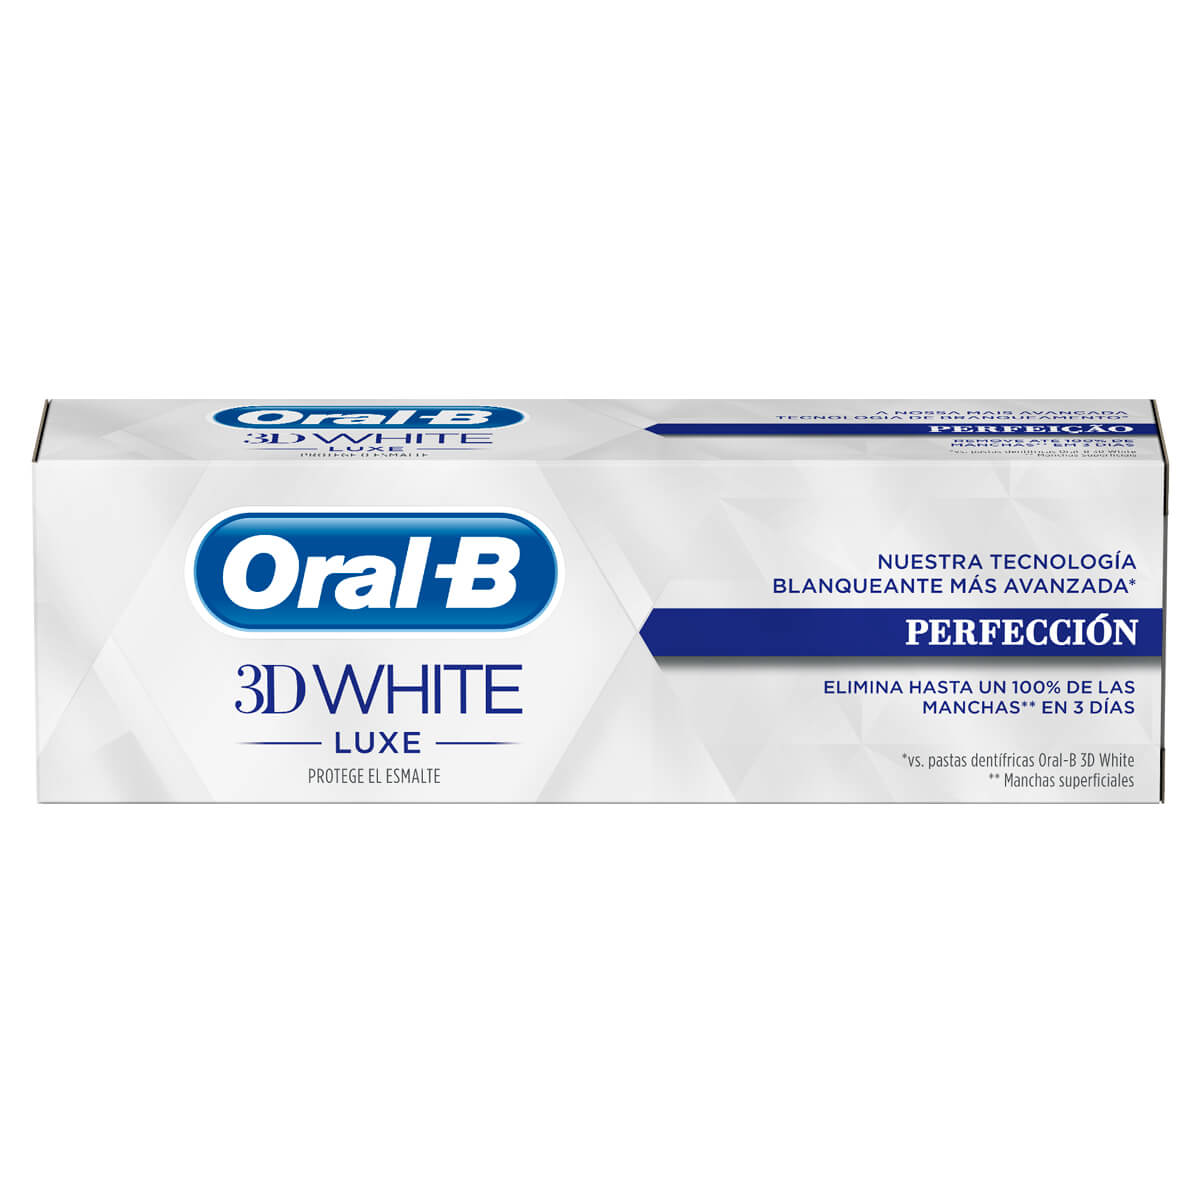 Oral-B 3D White Luxe Perfección undefined